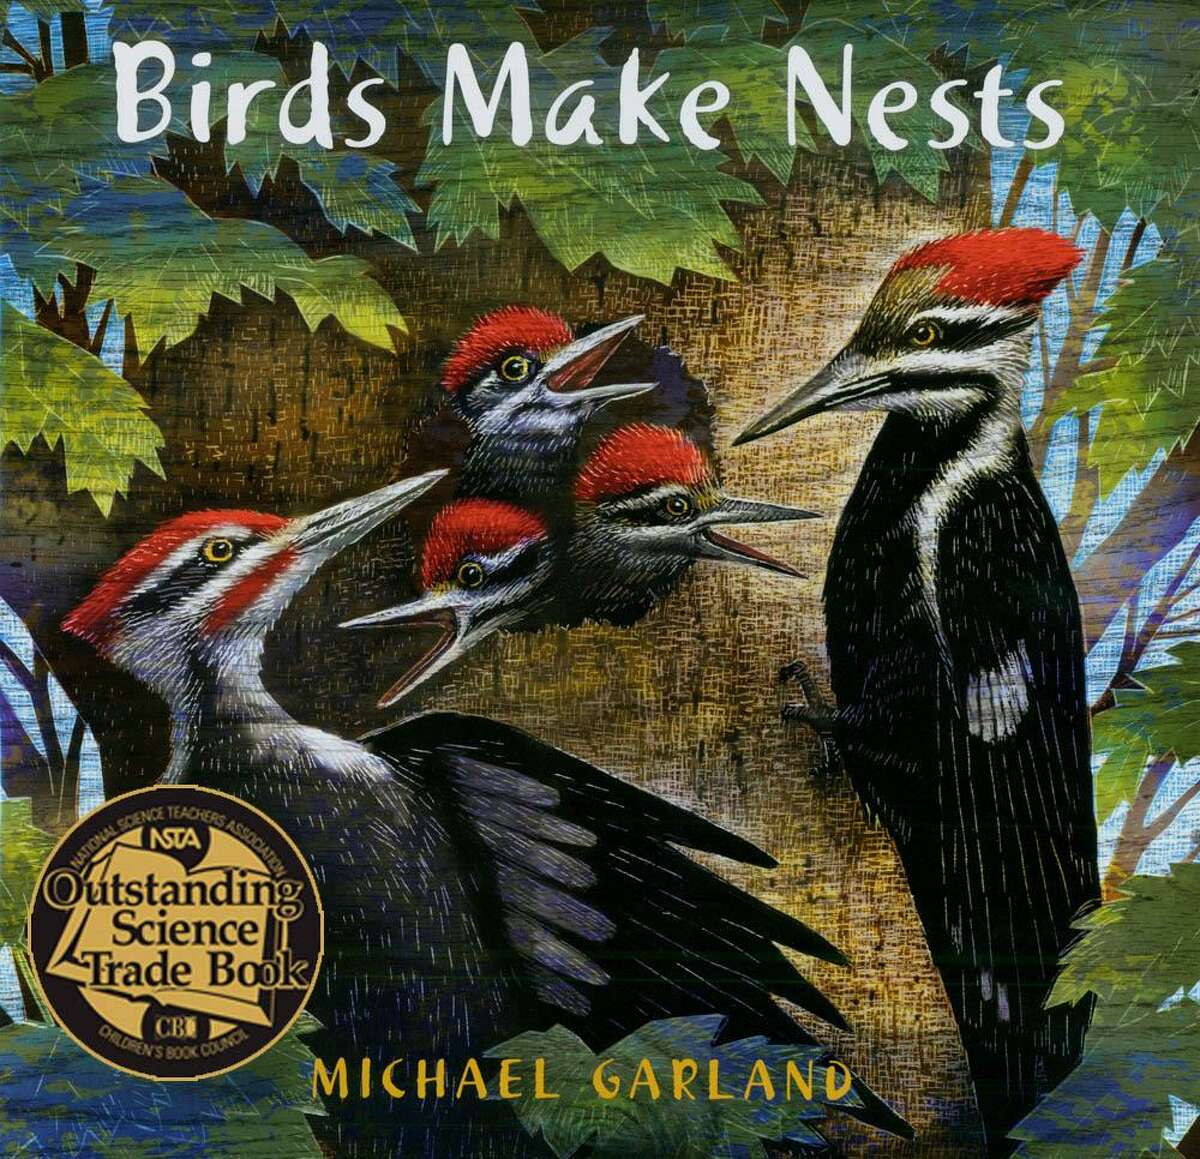 Author/illustrator Michael Garland will present a children’s talk and book signing at Sherman Library March 13 at 1:30 p.m. He will sign copies of his “Birds Make Nests” book.